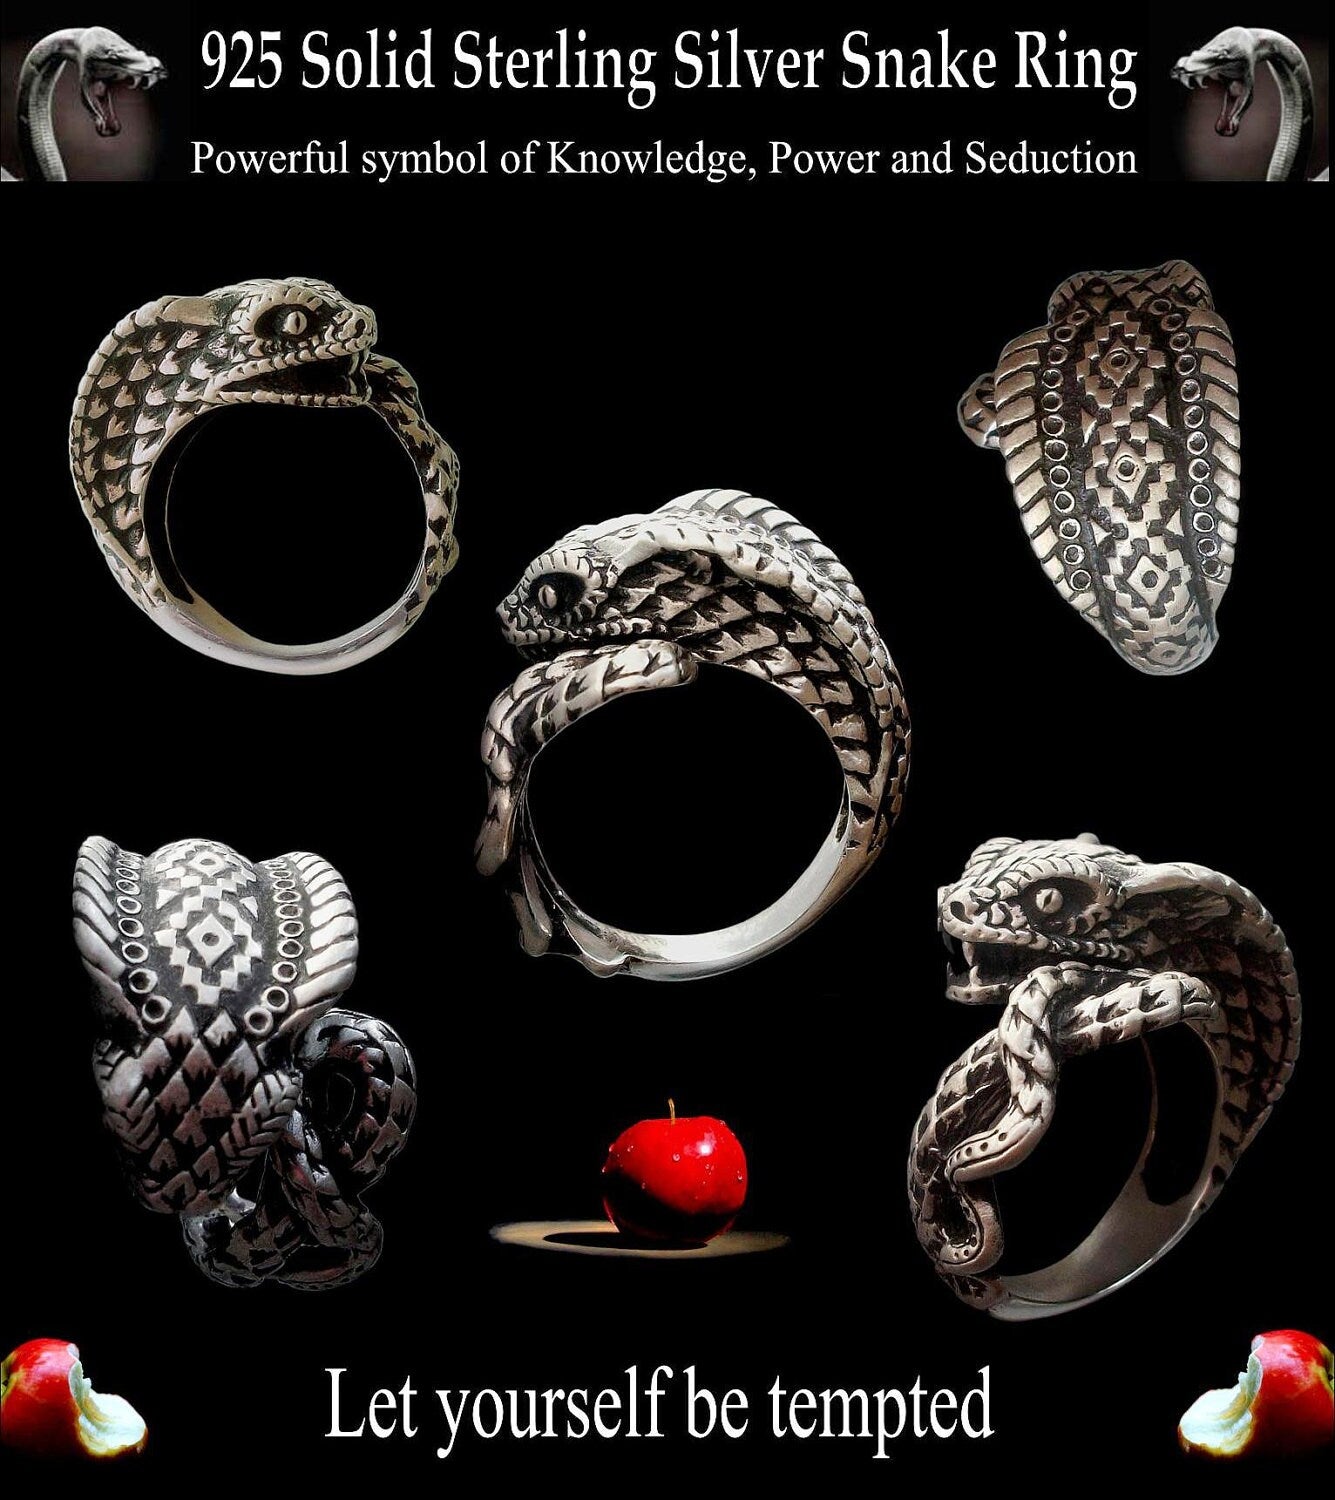 Snake ring - Sterling Silver Serpent of temptation ring - All Sizes